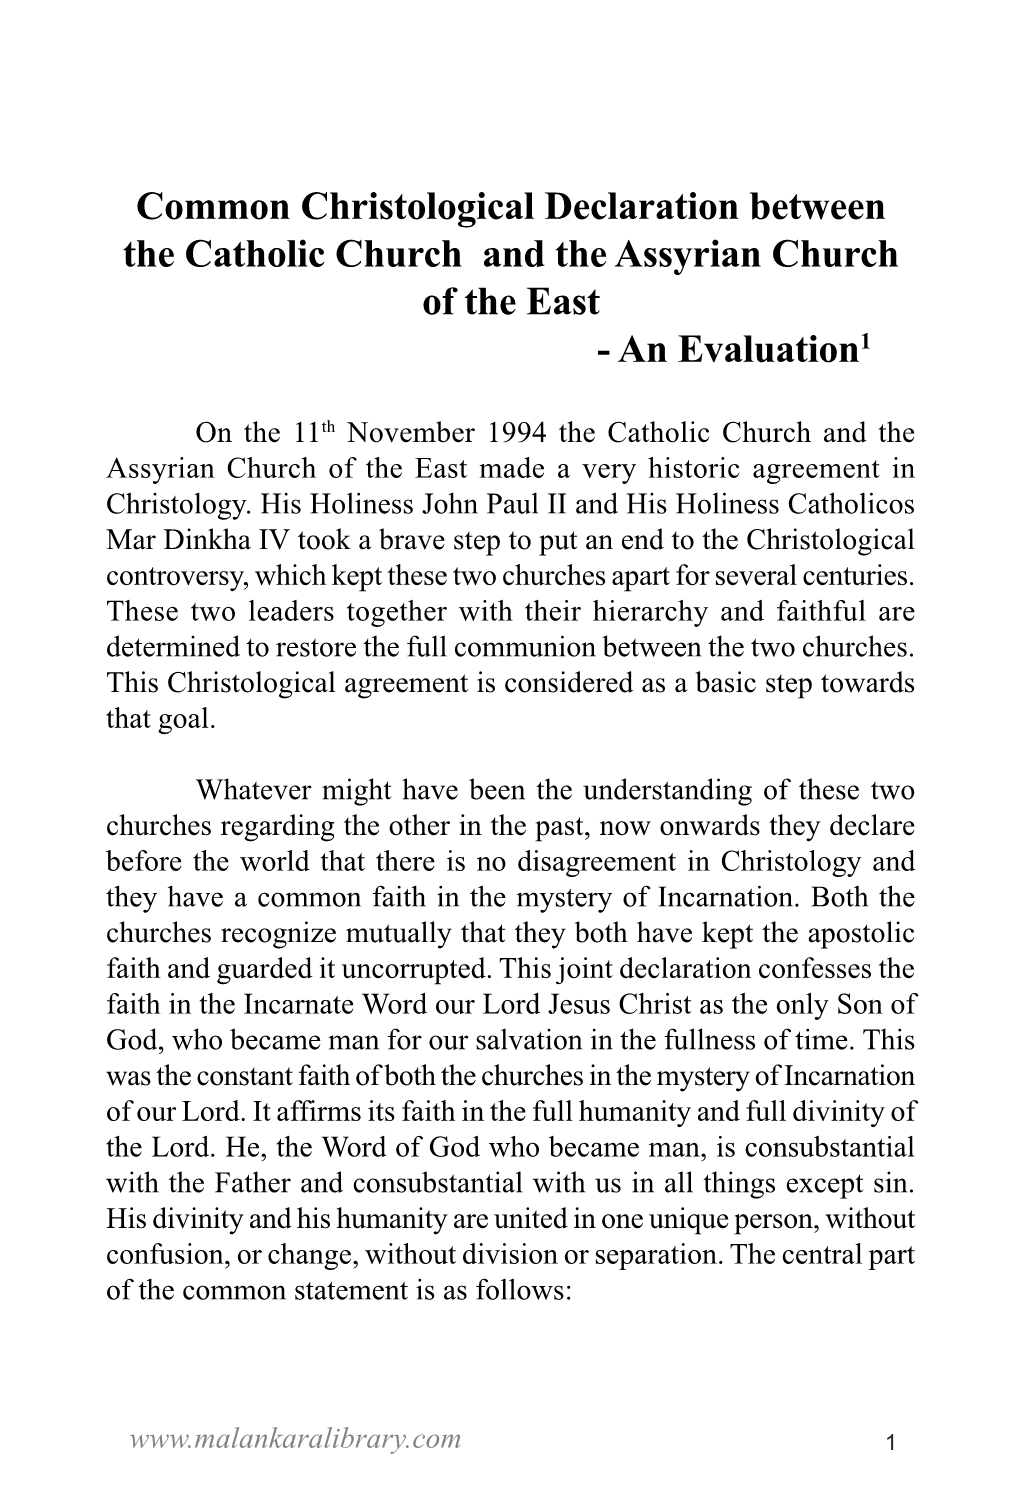 Common Christological Declaration Between the Catholic Church and the Assyrian Church of the East - an Evaluation1